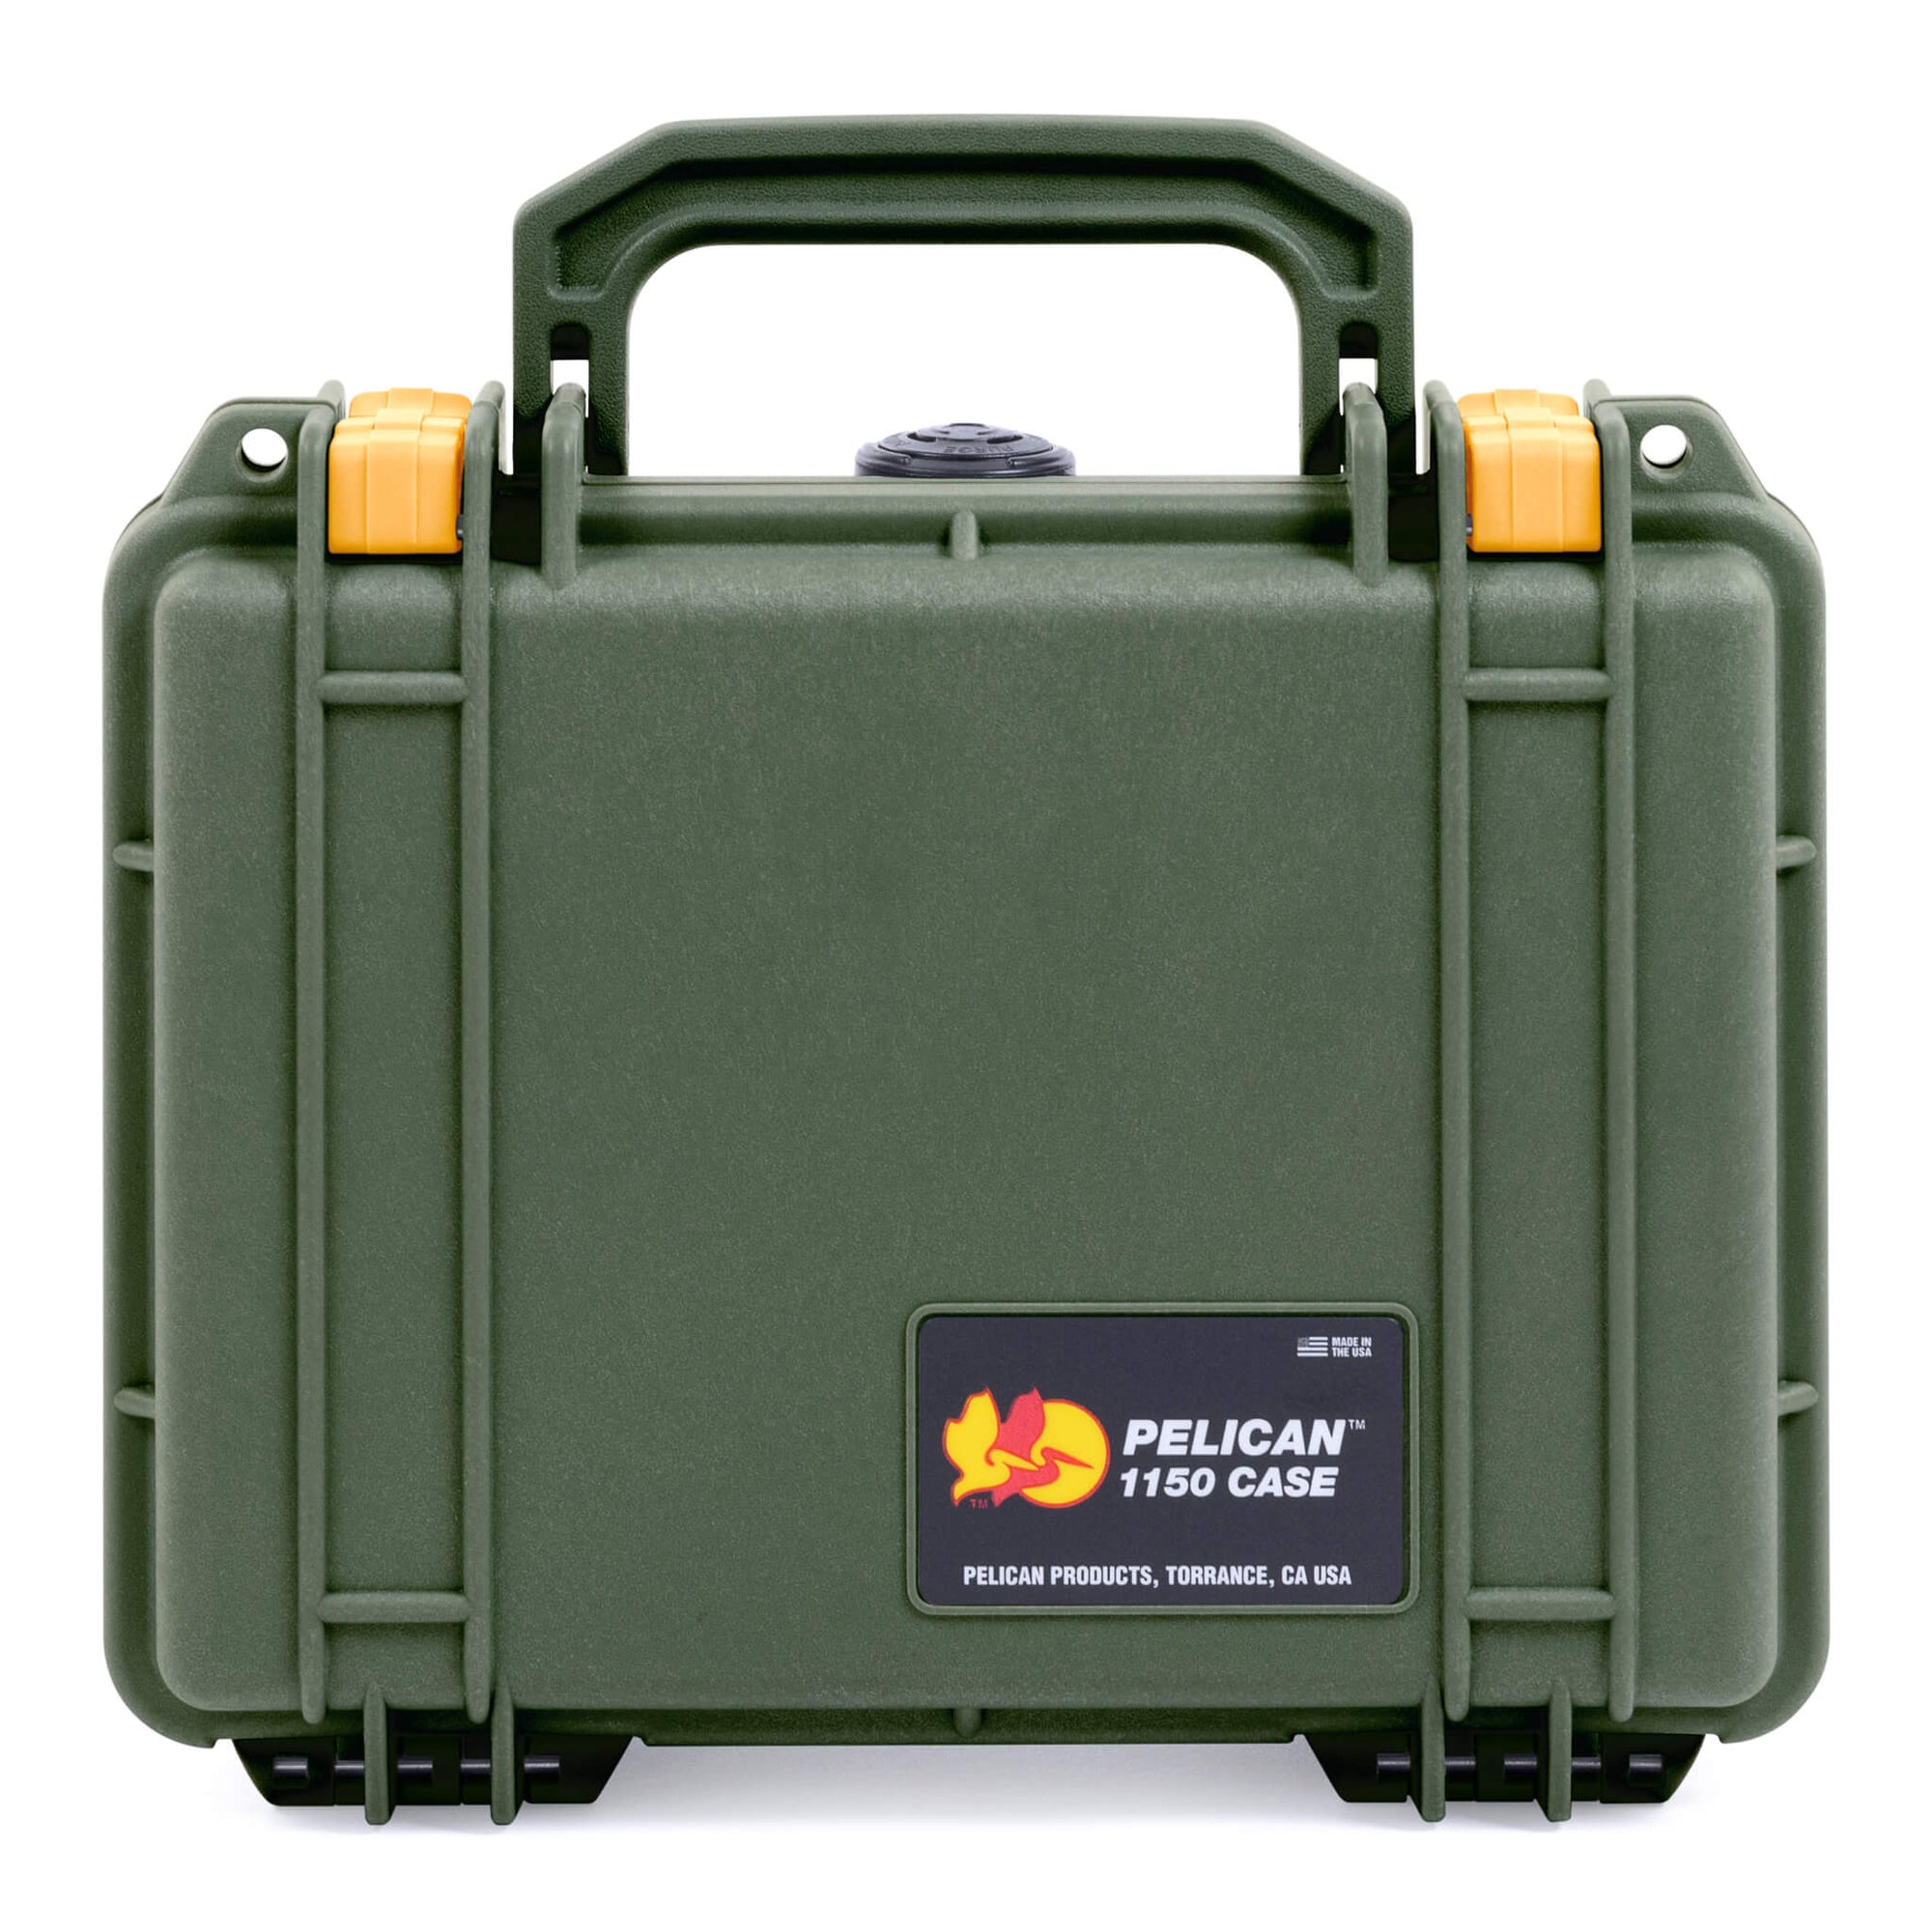 Pelican 1150 Case, OD Green with Yellow Latches ColorCase 